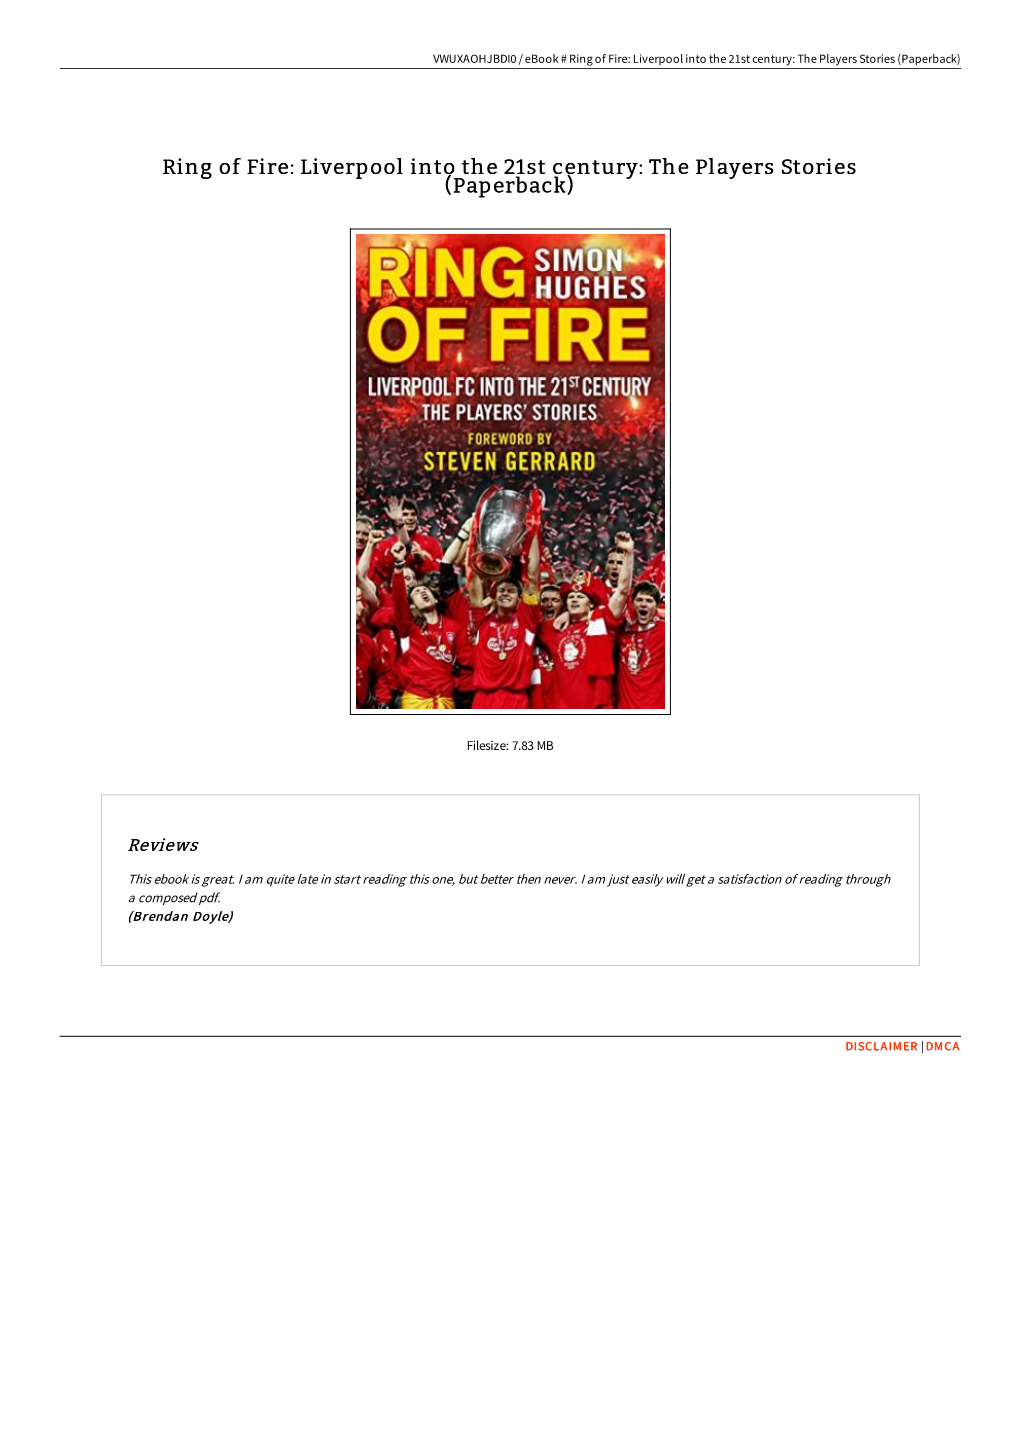 Ring of Fire: Liverpool Into the 21St Century: the Players Stories (Paperback)